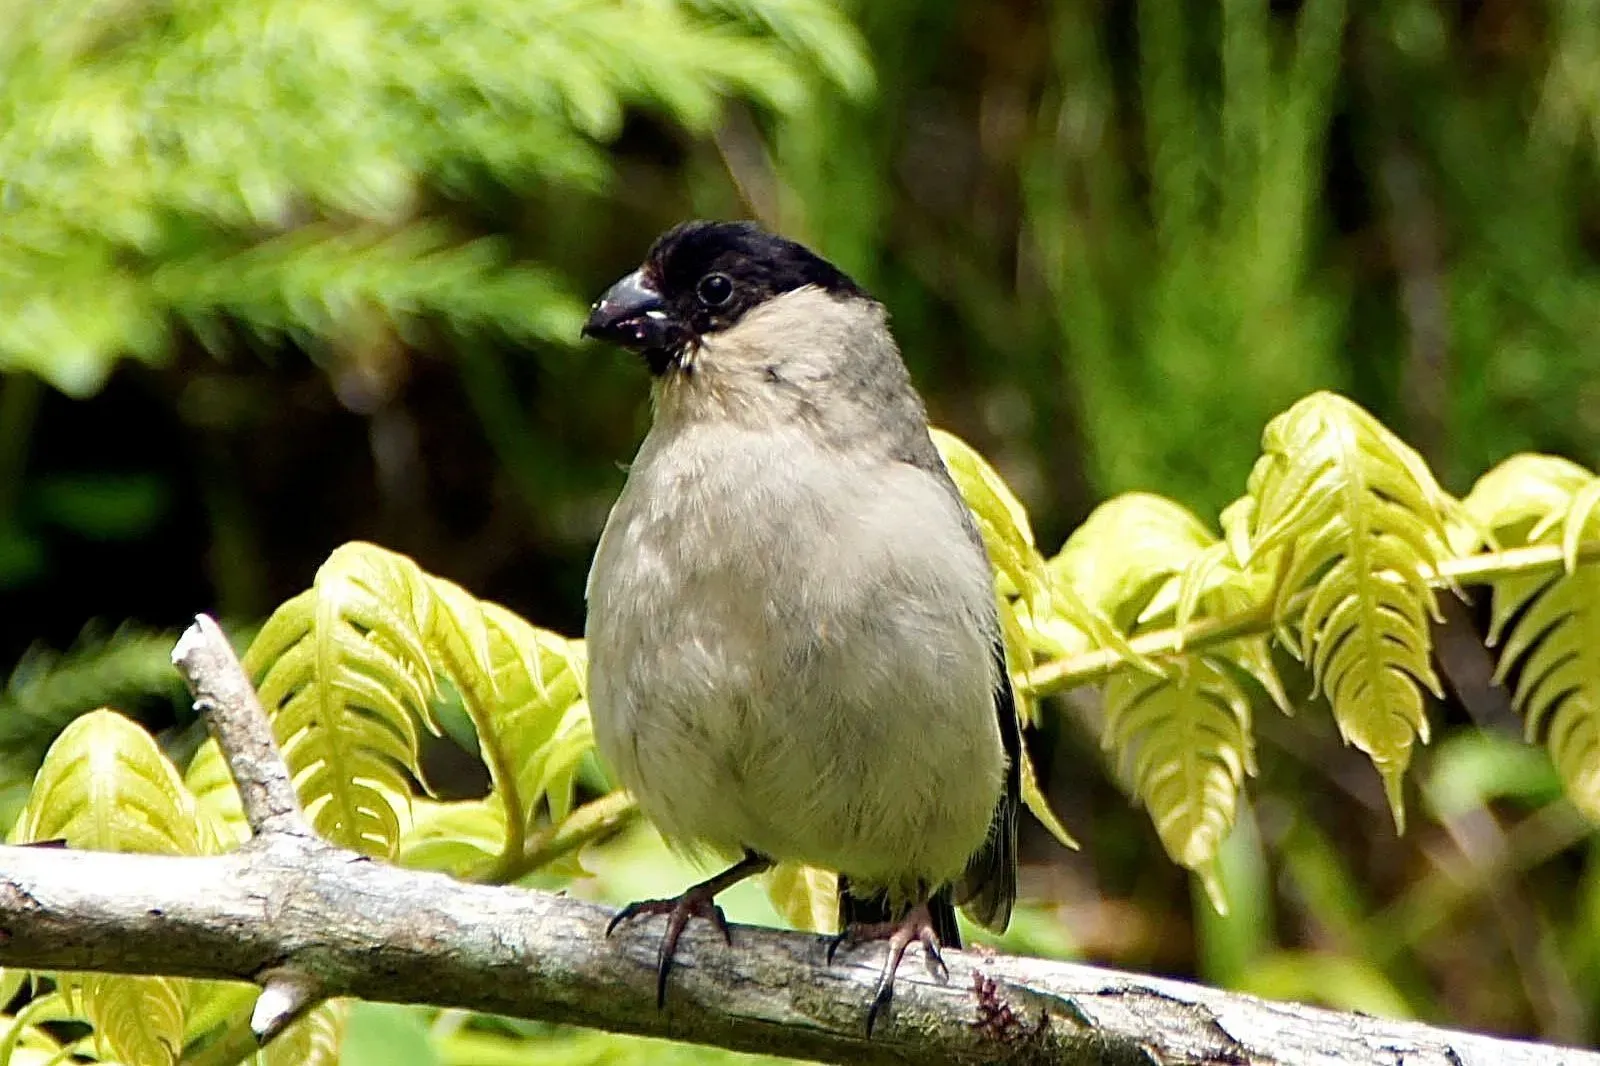 Fun facts about the Azores bullfinches for kids.